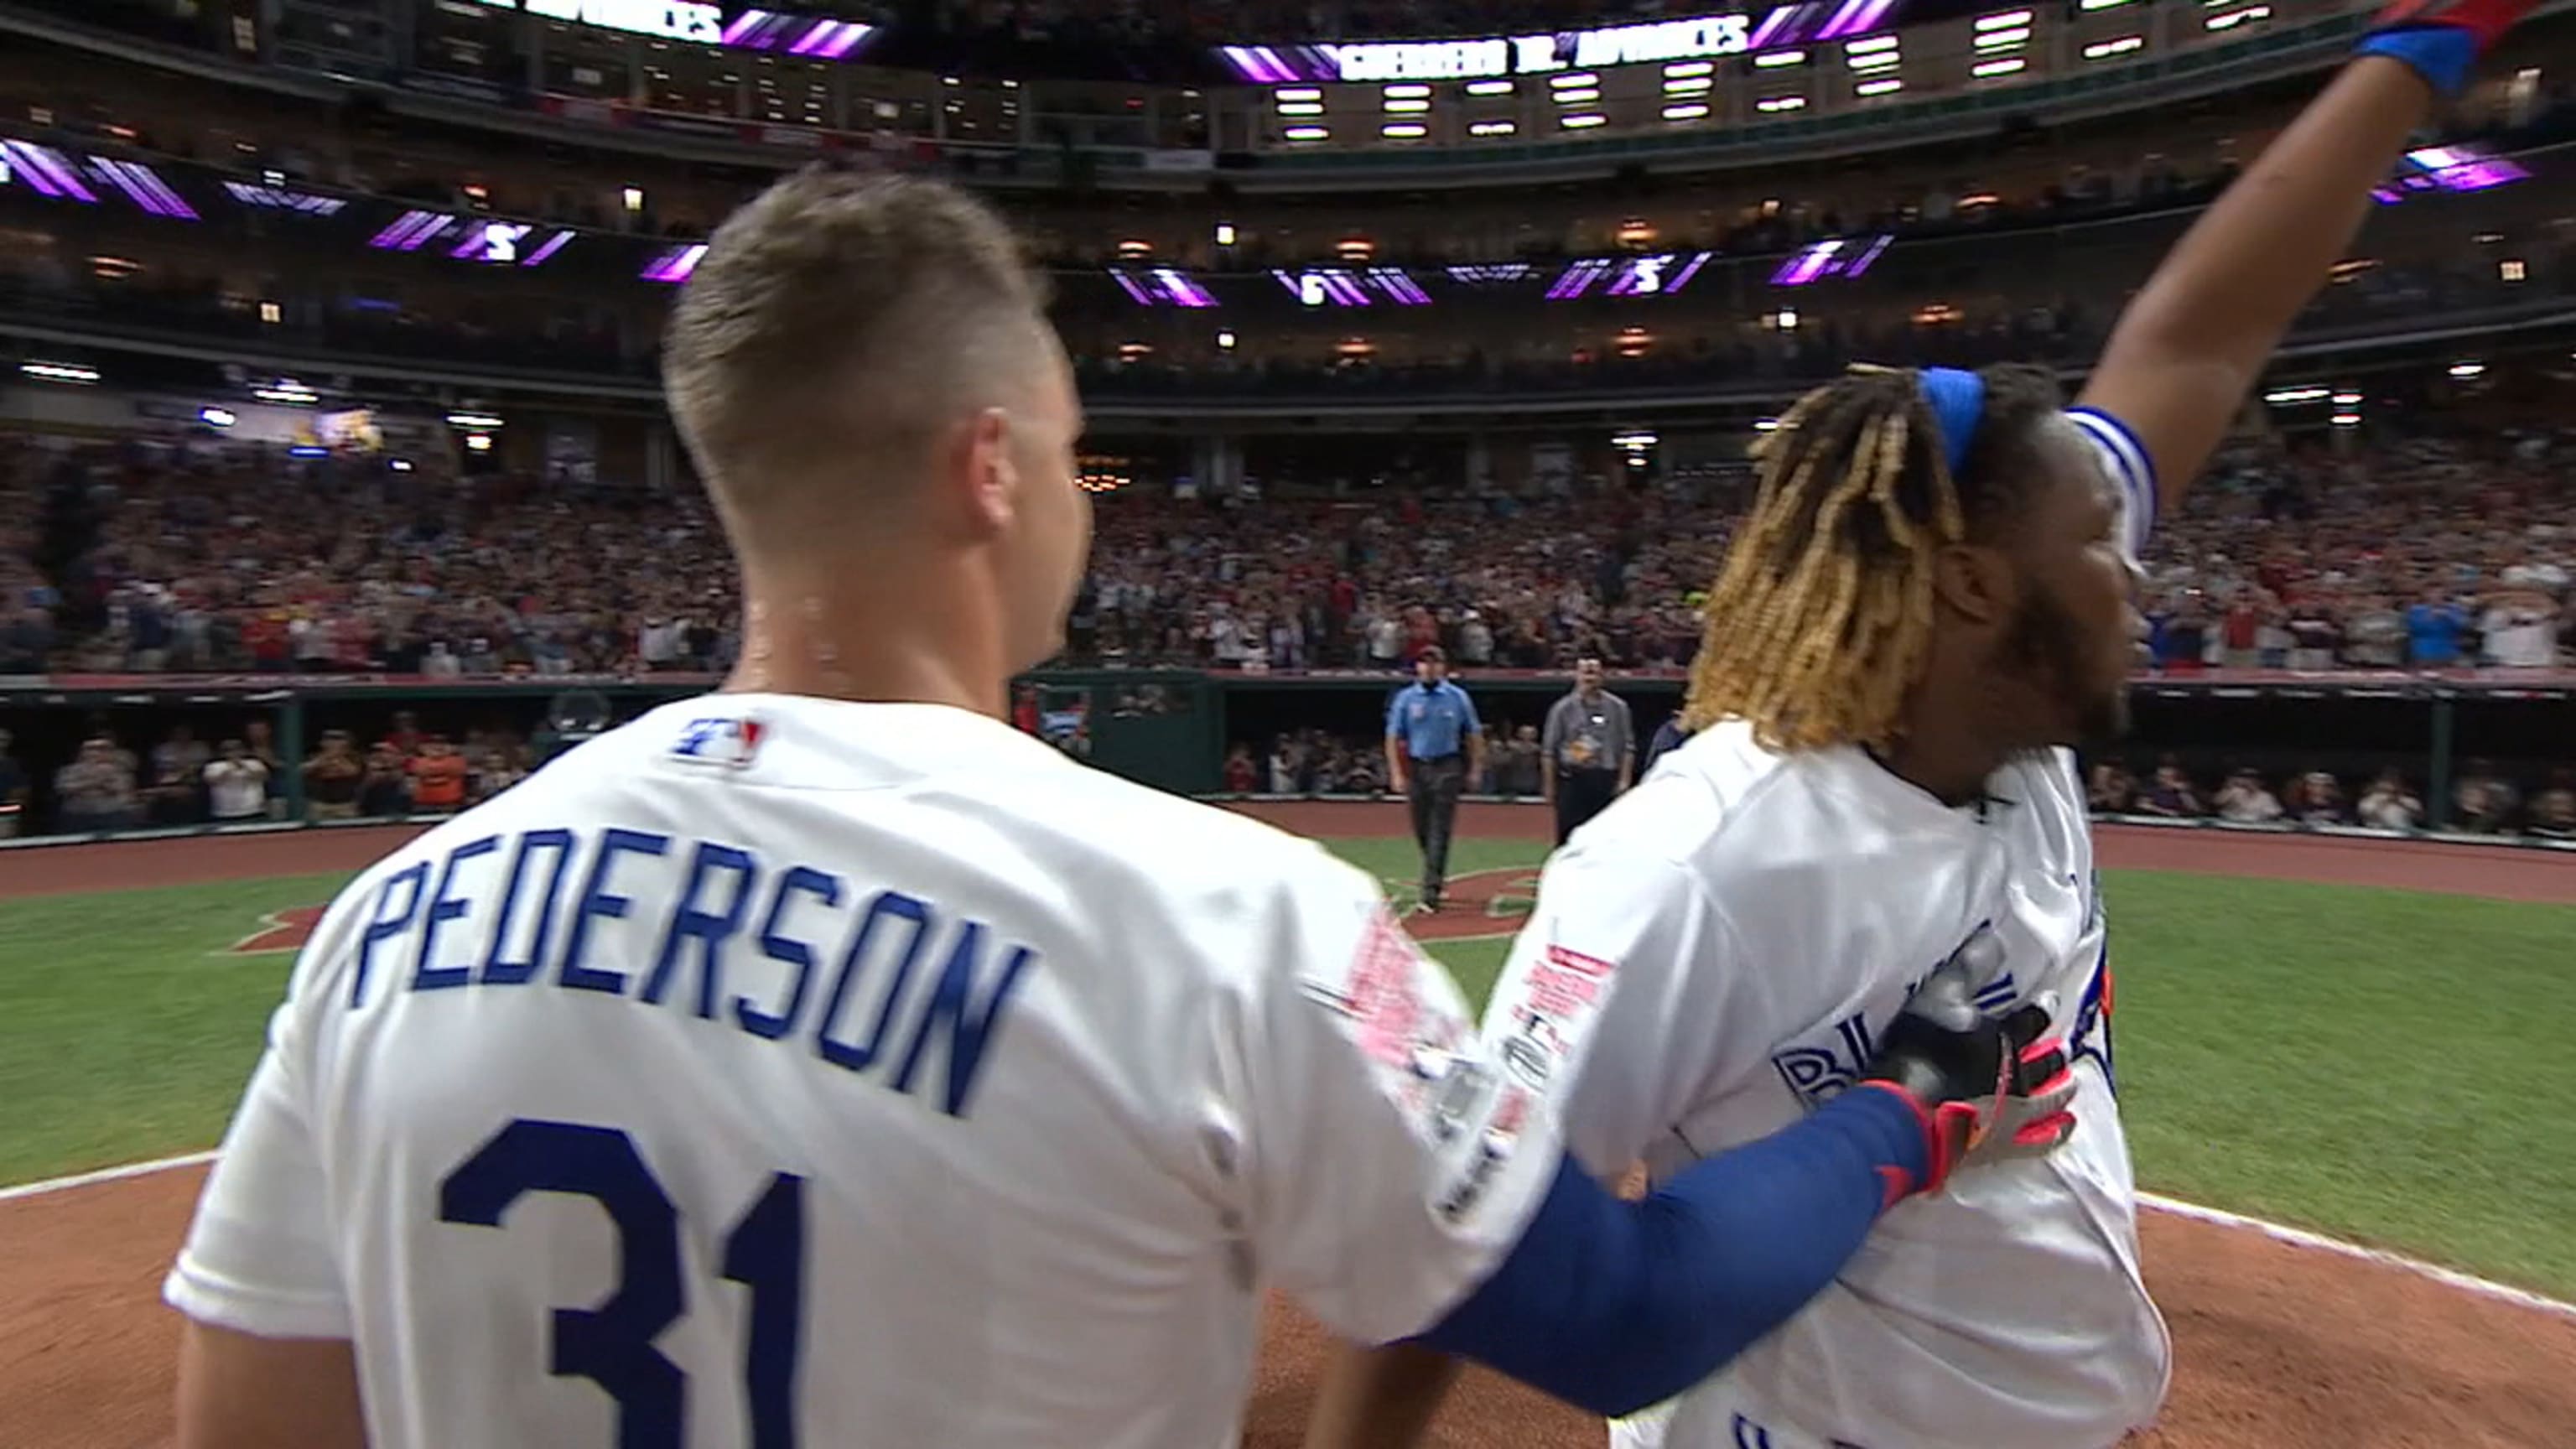 SportsCenter - Vladimir Guerrero Jr. grew up watching his dad compete in  the Home Run Derby. Now, Vlad Jr. will reportedly be competing in the 2019 Home  Run Derby in Cleveland.